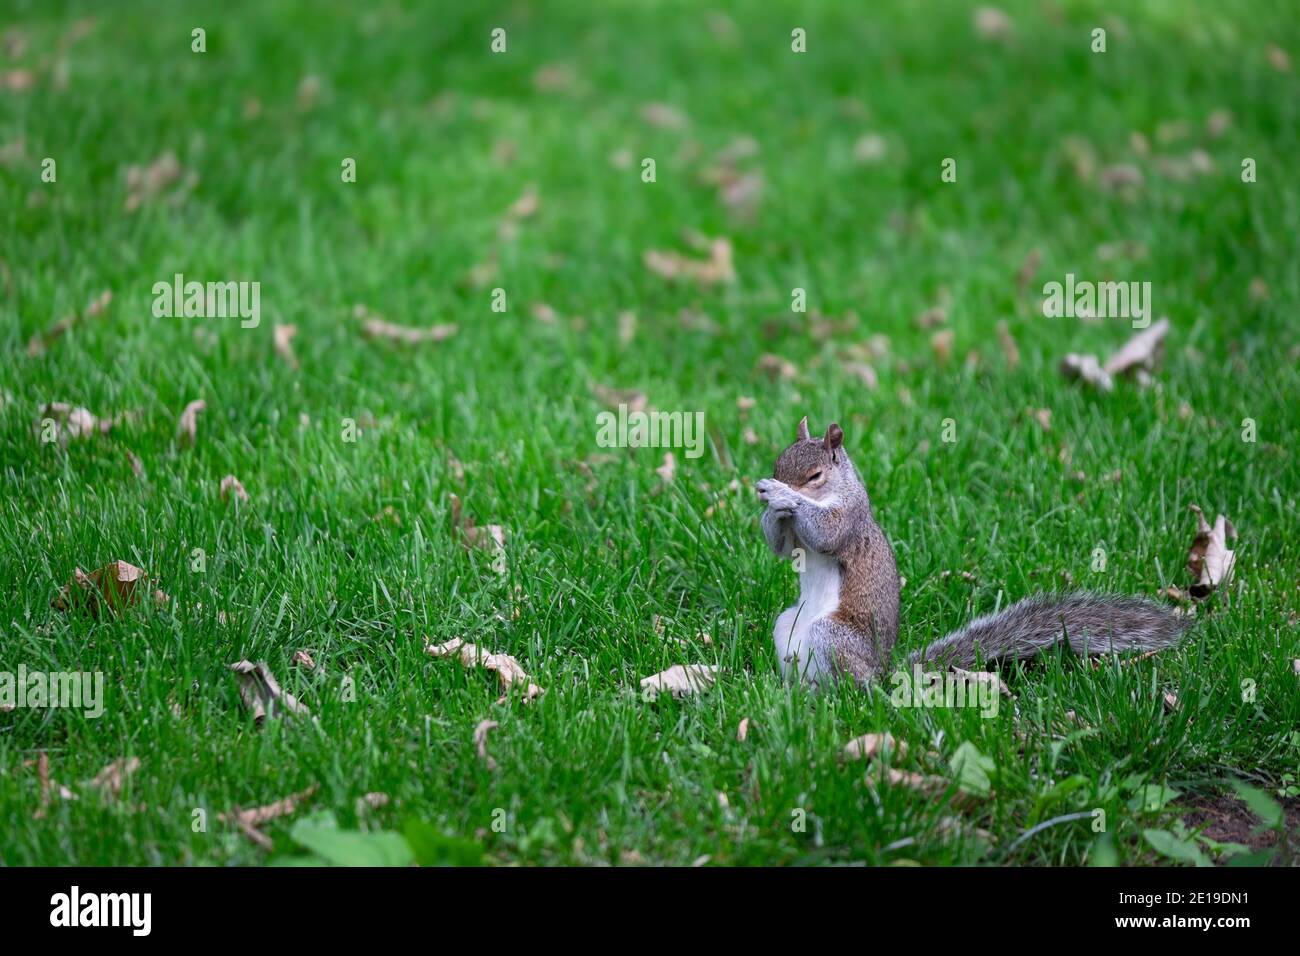 Squirrel sits upright in the grass and rubs his nose with both front legs. There are many leaves in the grass Stock Photo